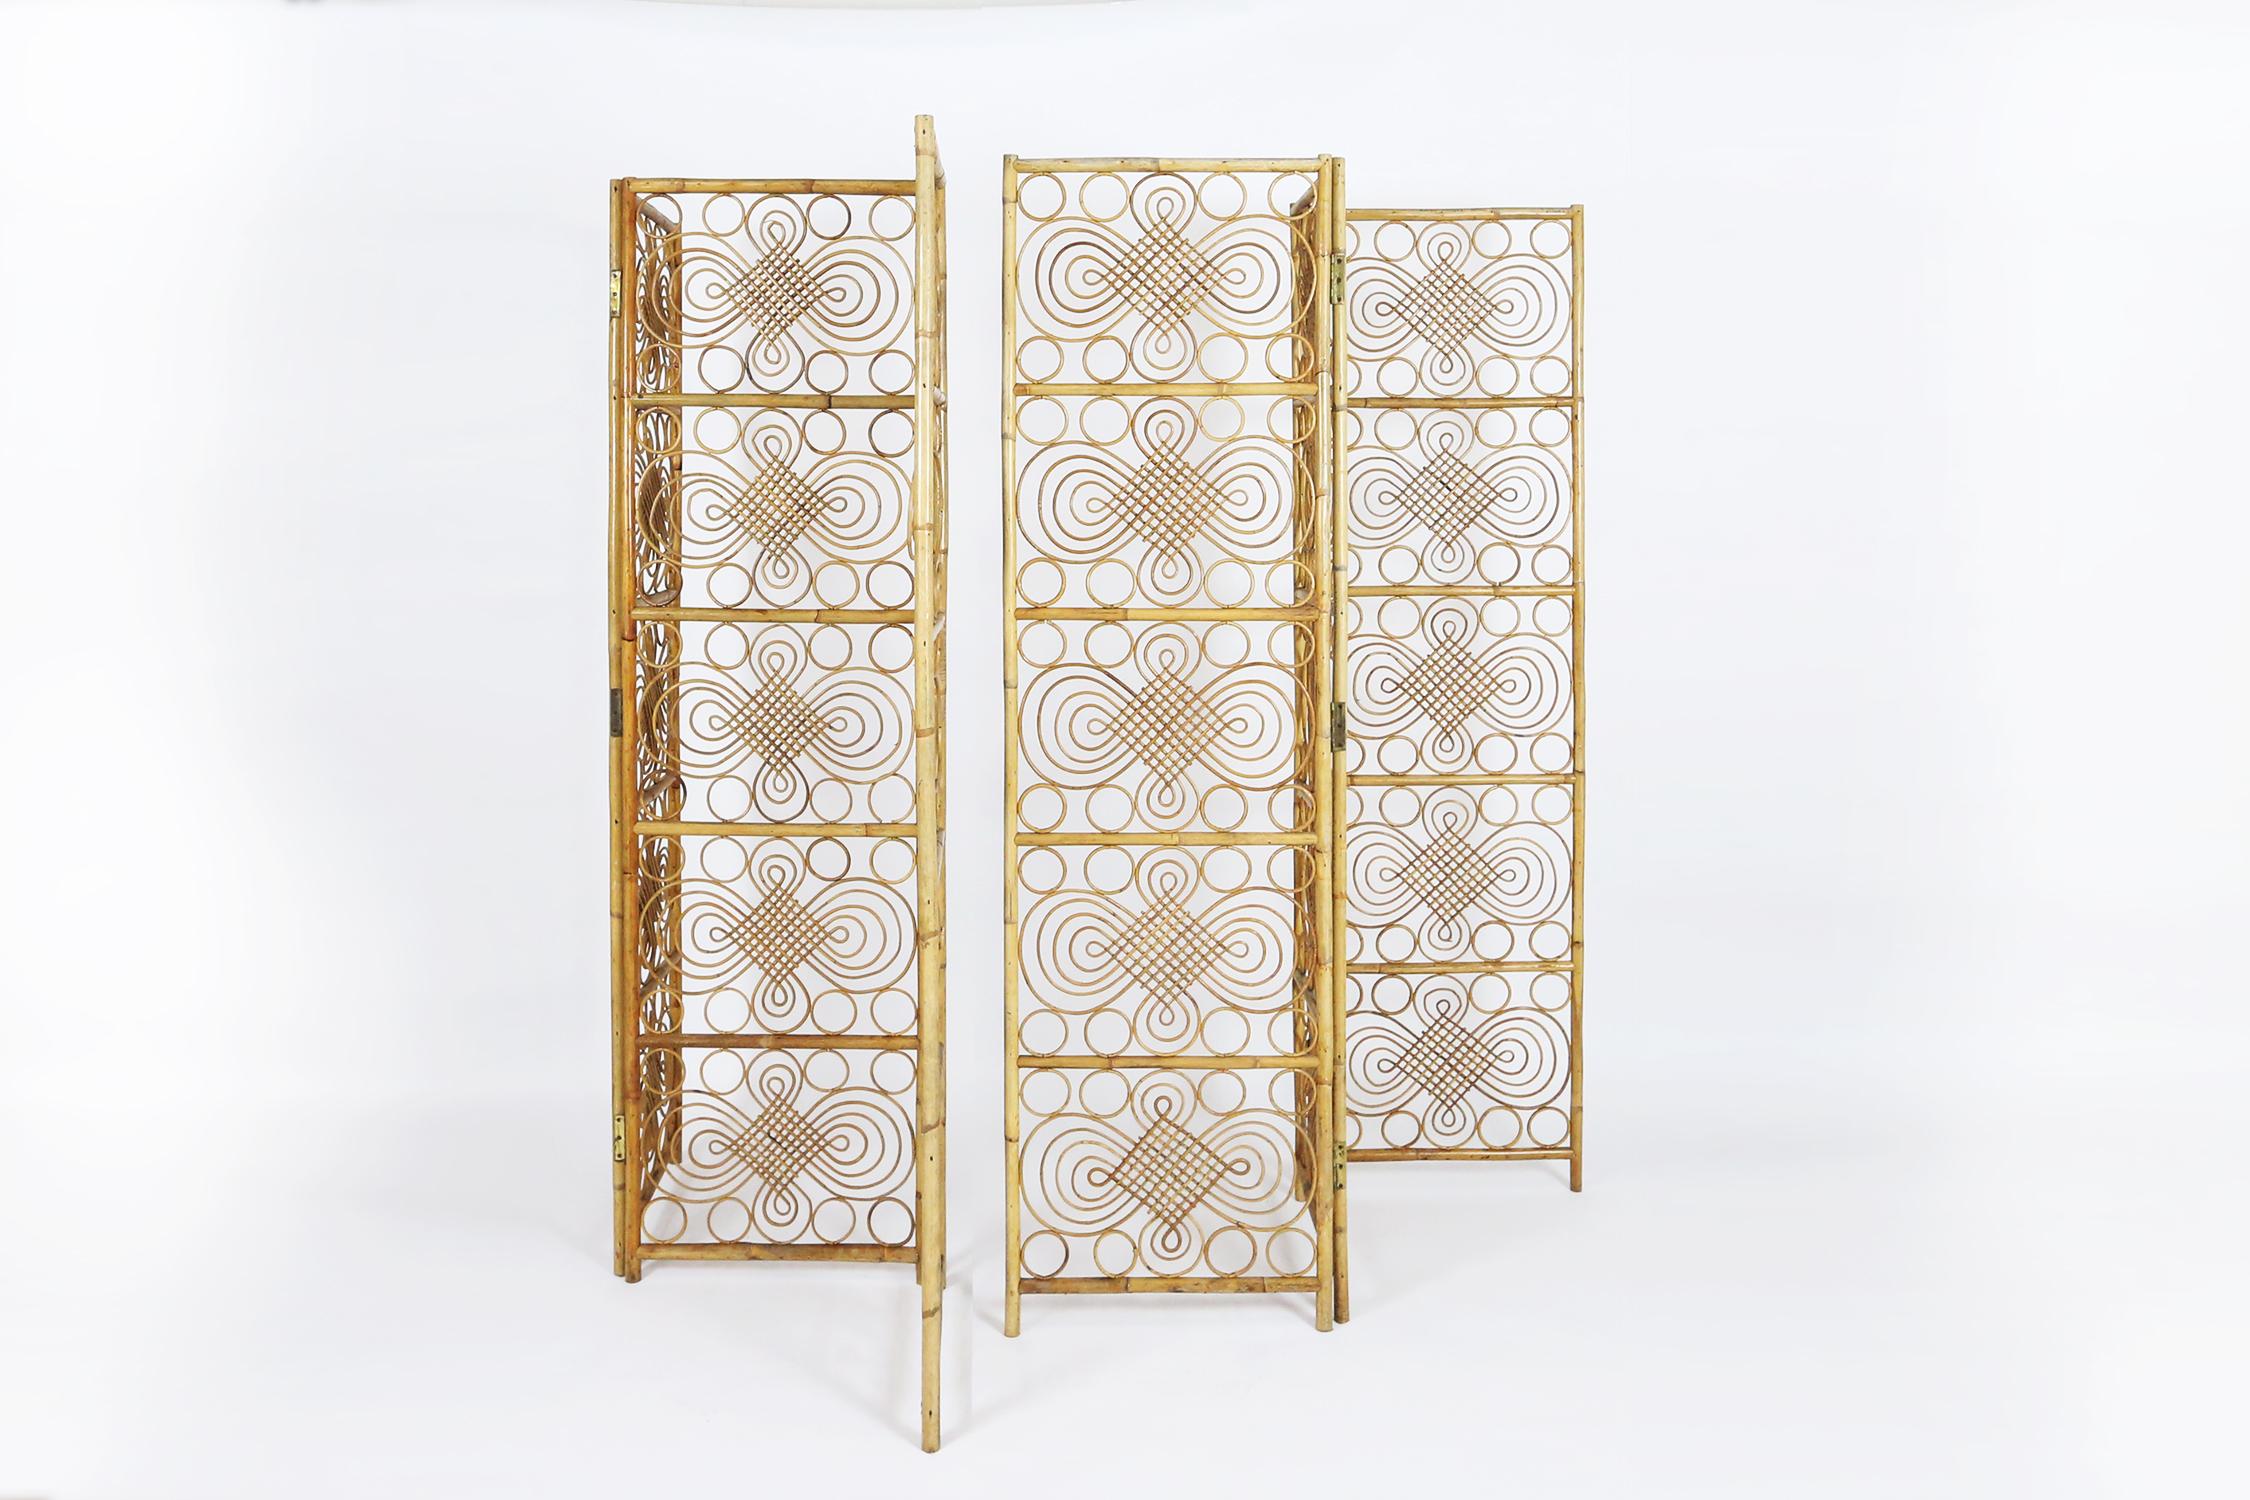 Highly decorative French room divider or folding screen in bamboo and rattan. We have 2 identical 3-panel room dividers available. Each room divider measures 153cm long, so both together makes a nice length of more than 3m
Both pieces are in very